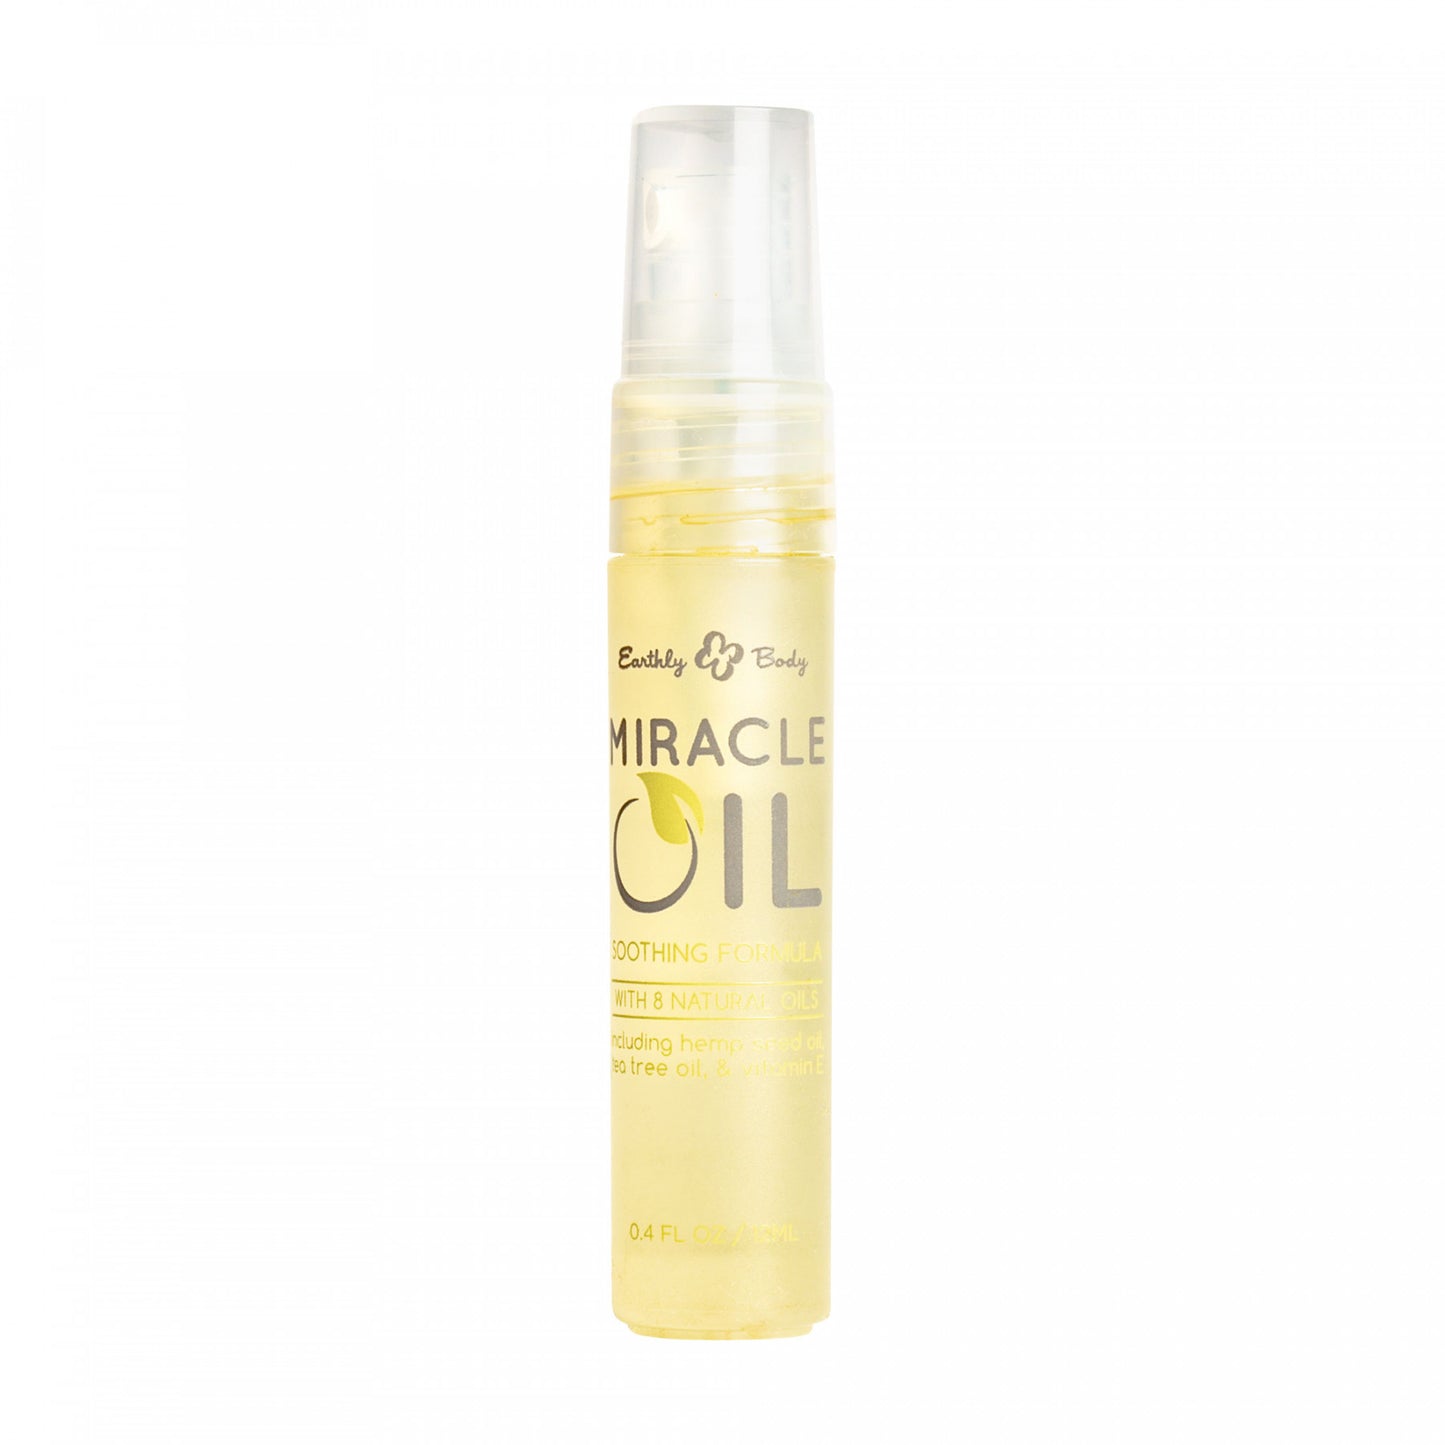 Slim clear spray tube with golden color oil inside with Miracle Oil label